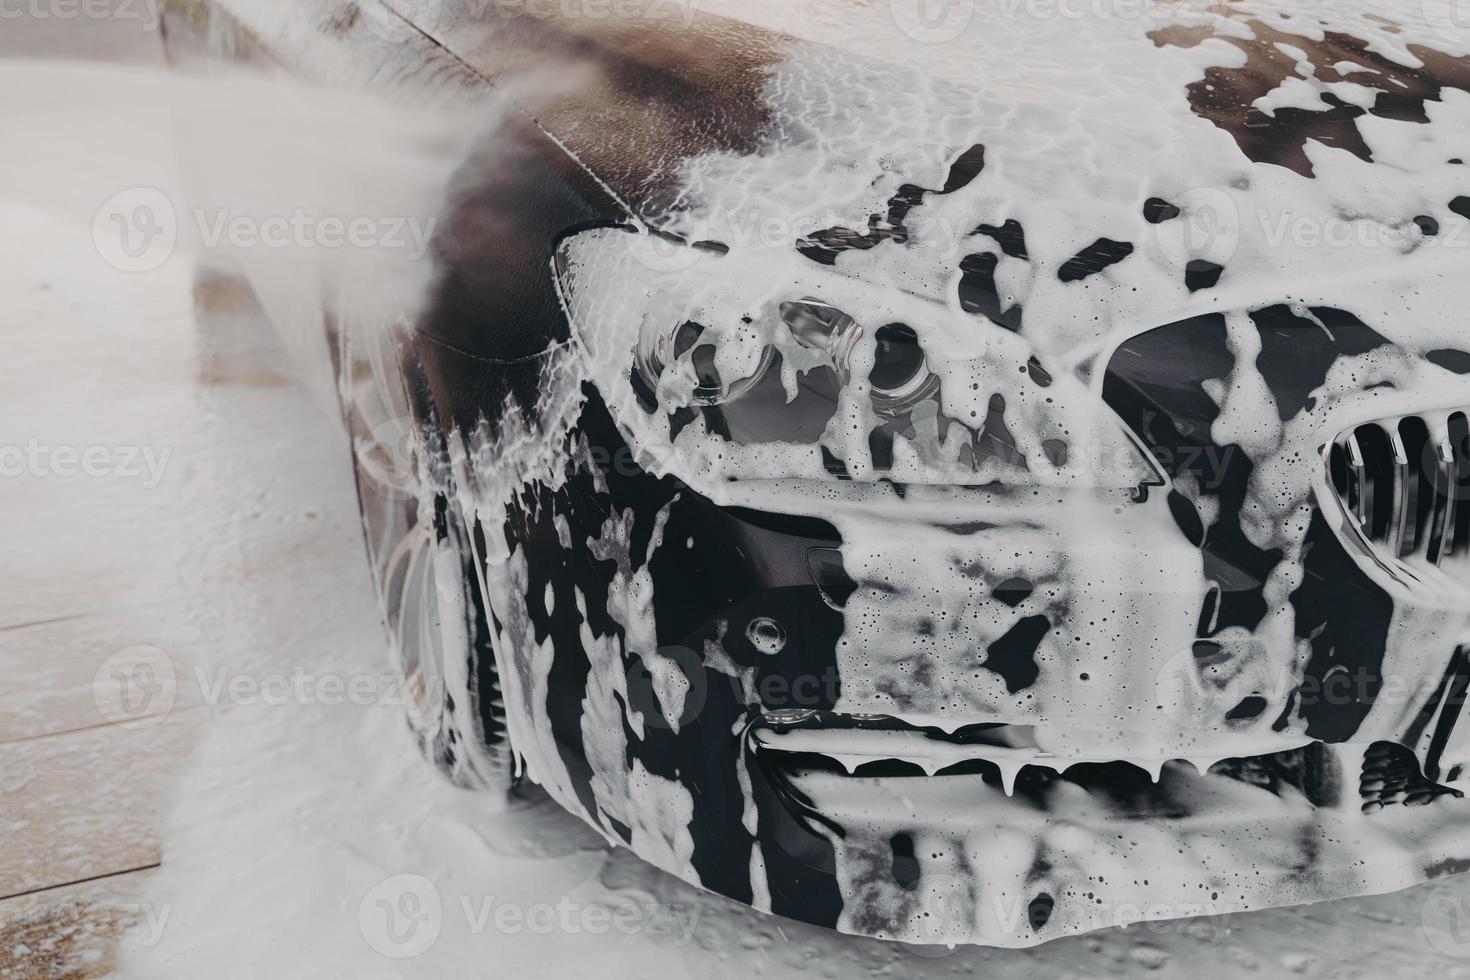 Black car in white snow foam during carwashing and cleaning outdoors photo